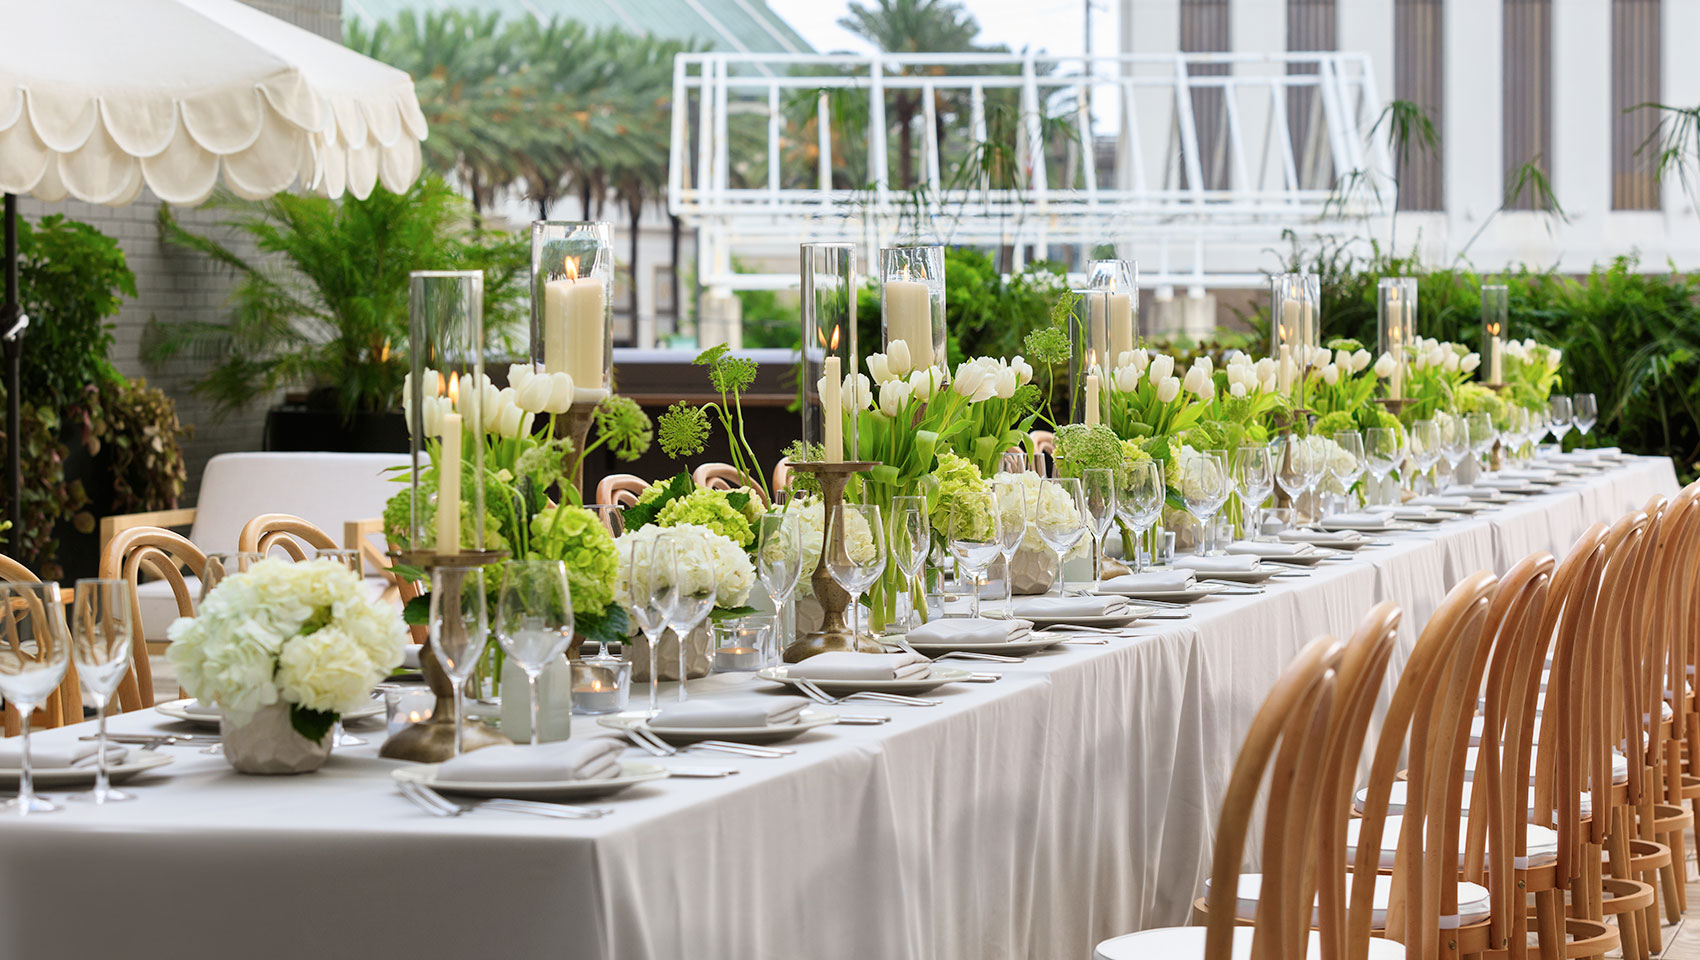 Rooftop wedding reception set up with a long table, white florals, and place settings